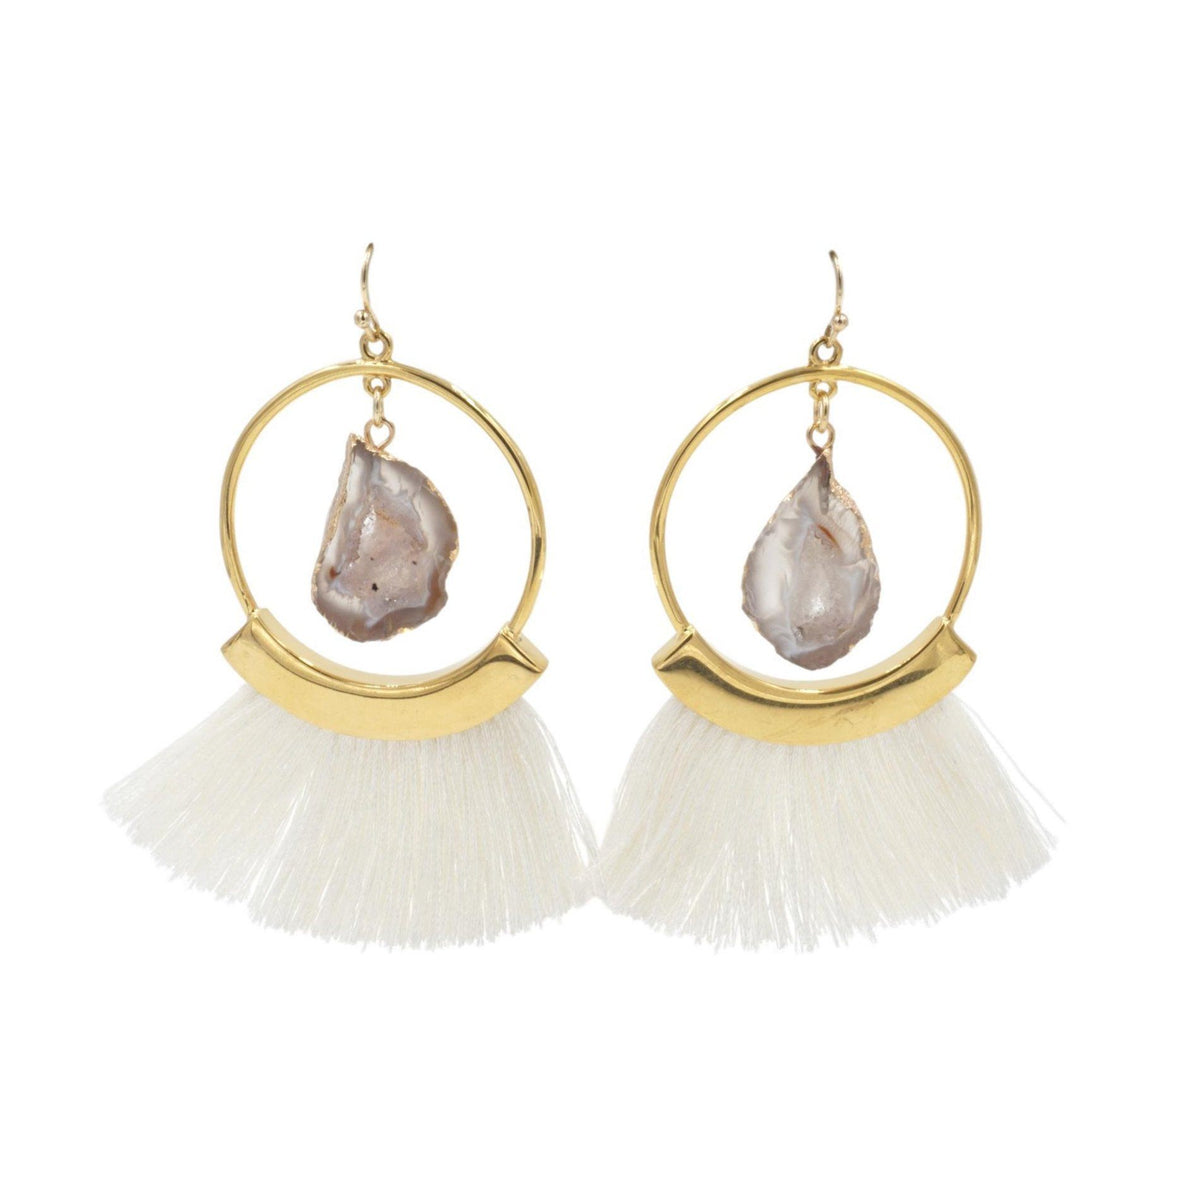 Agate Collection - Ashen Fringe Earrings fine designer jewelry for men and women